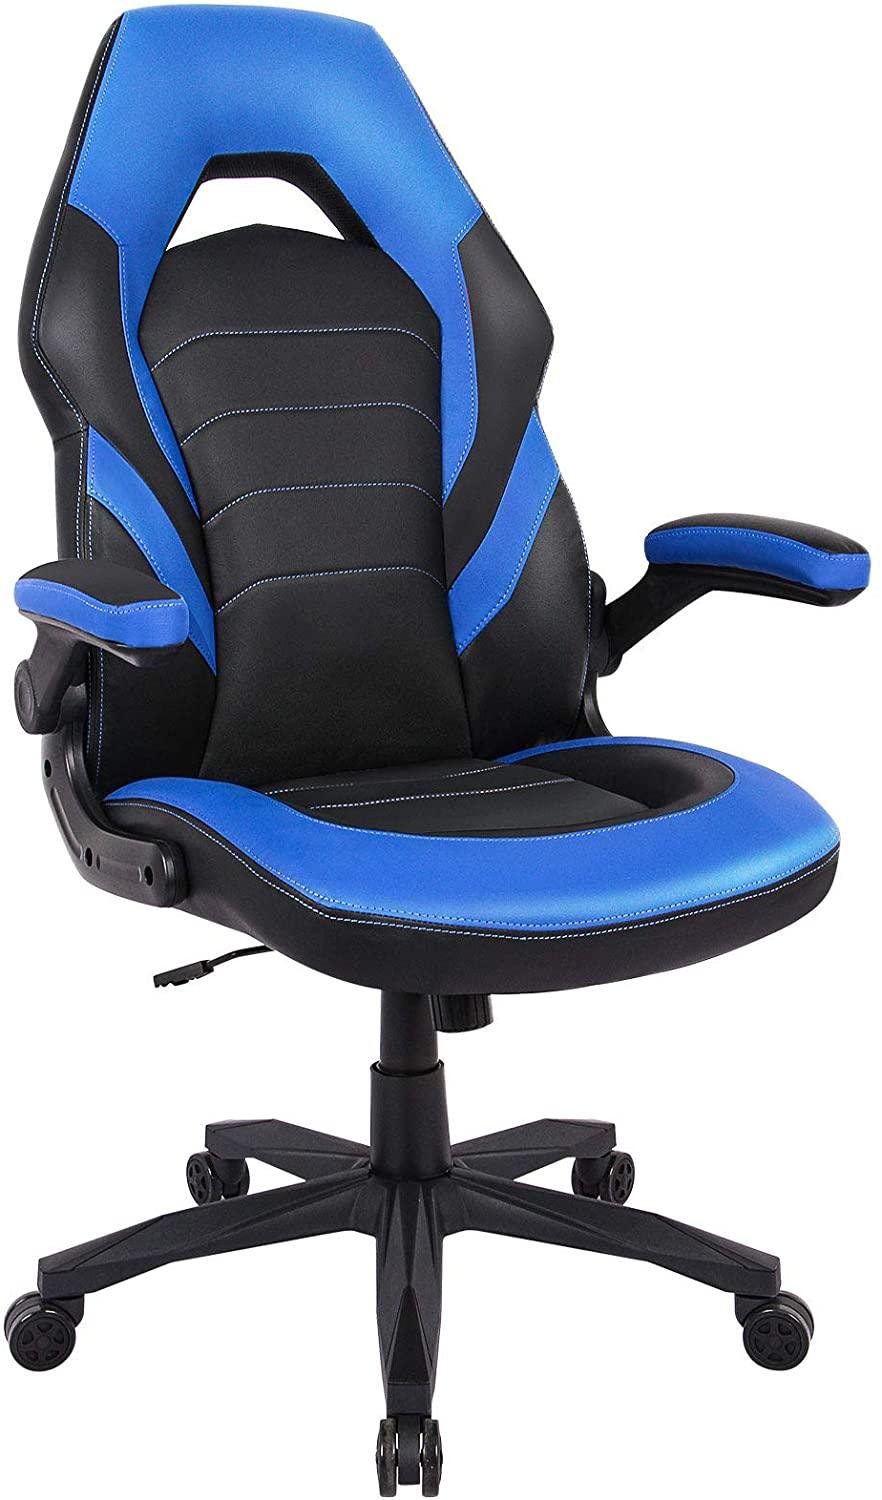 Aidoly Gaming Chair Racing Computer Desk Executive Office Chair, 360 degree Swivel Flip-up Arms Ergonomic Design for Lumbar Support Women Men Adults - Trendha